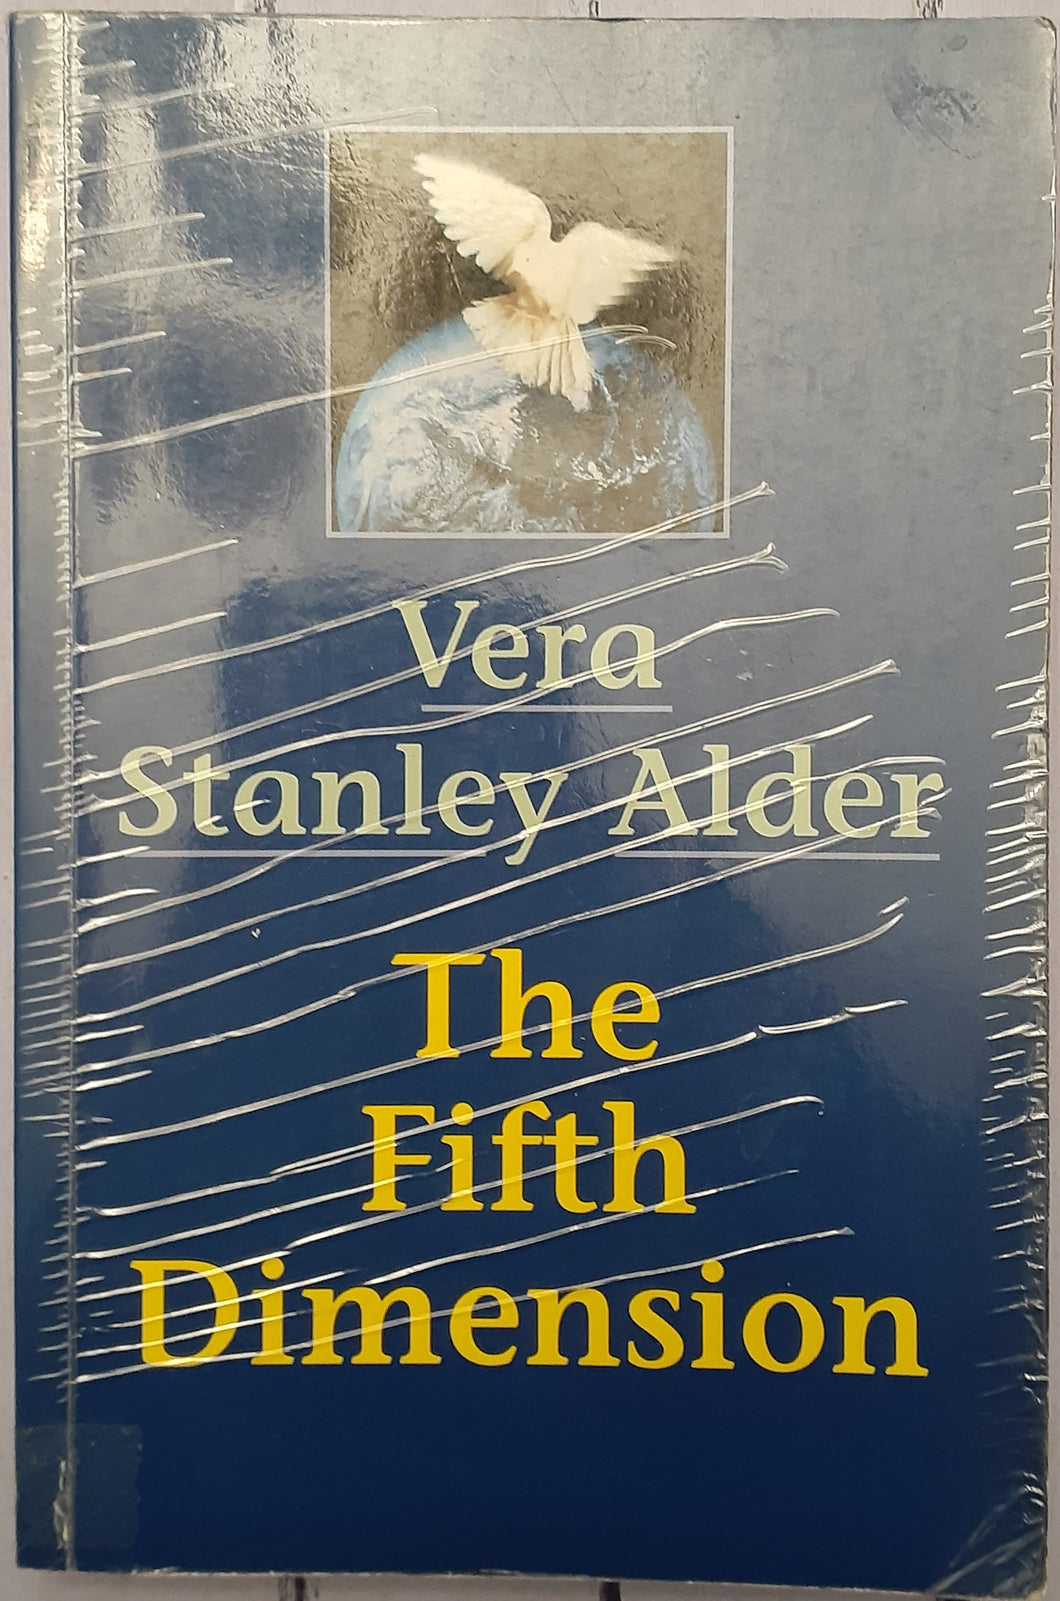 The Fifth Dimension